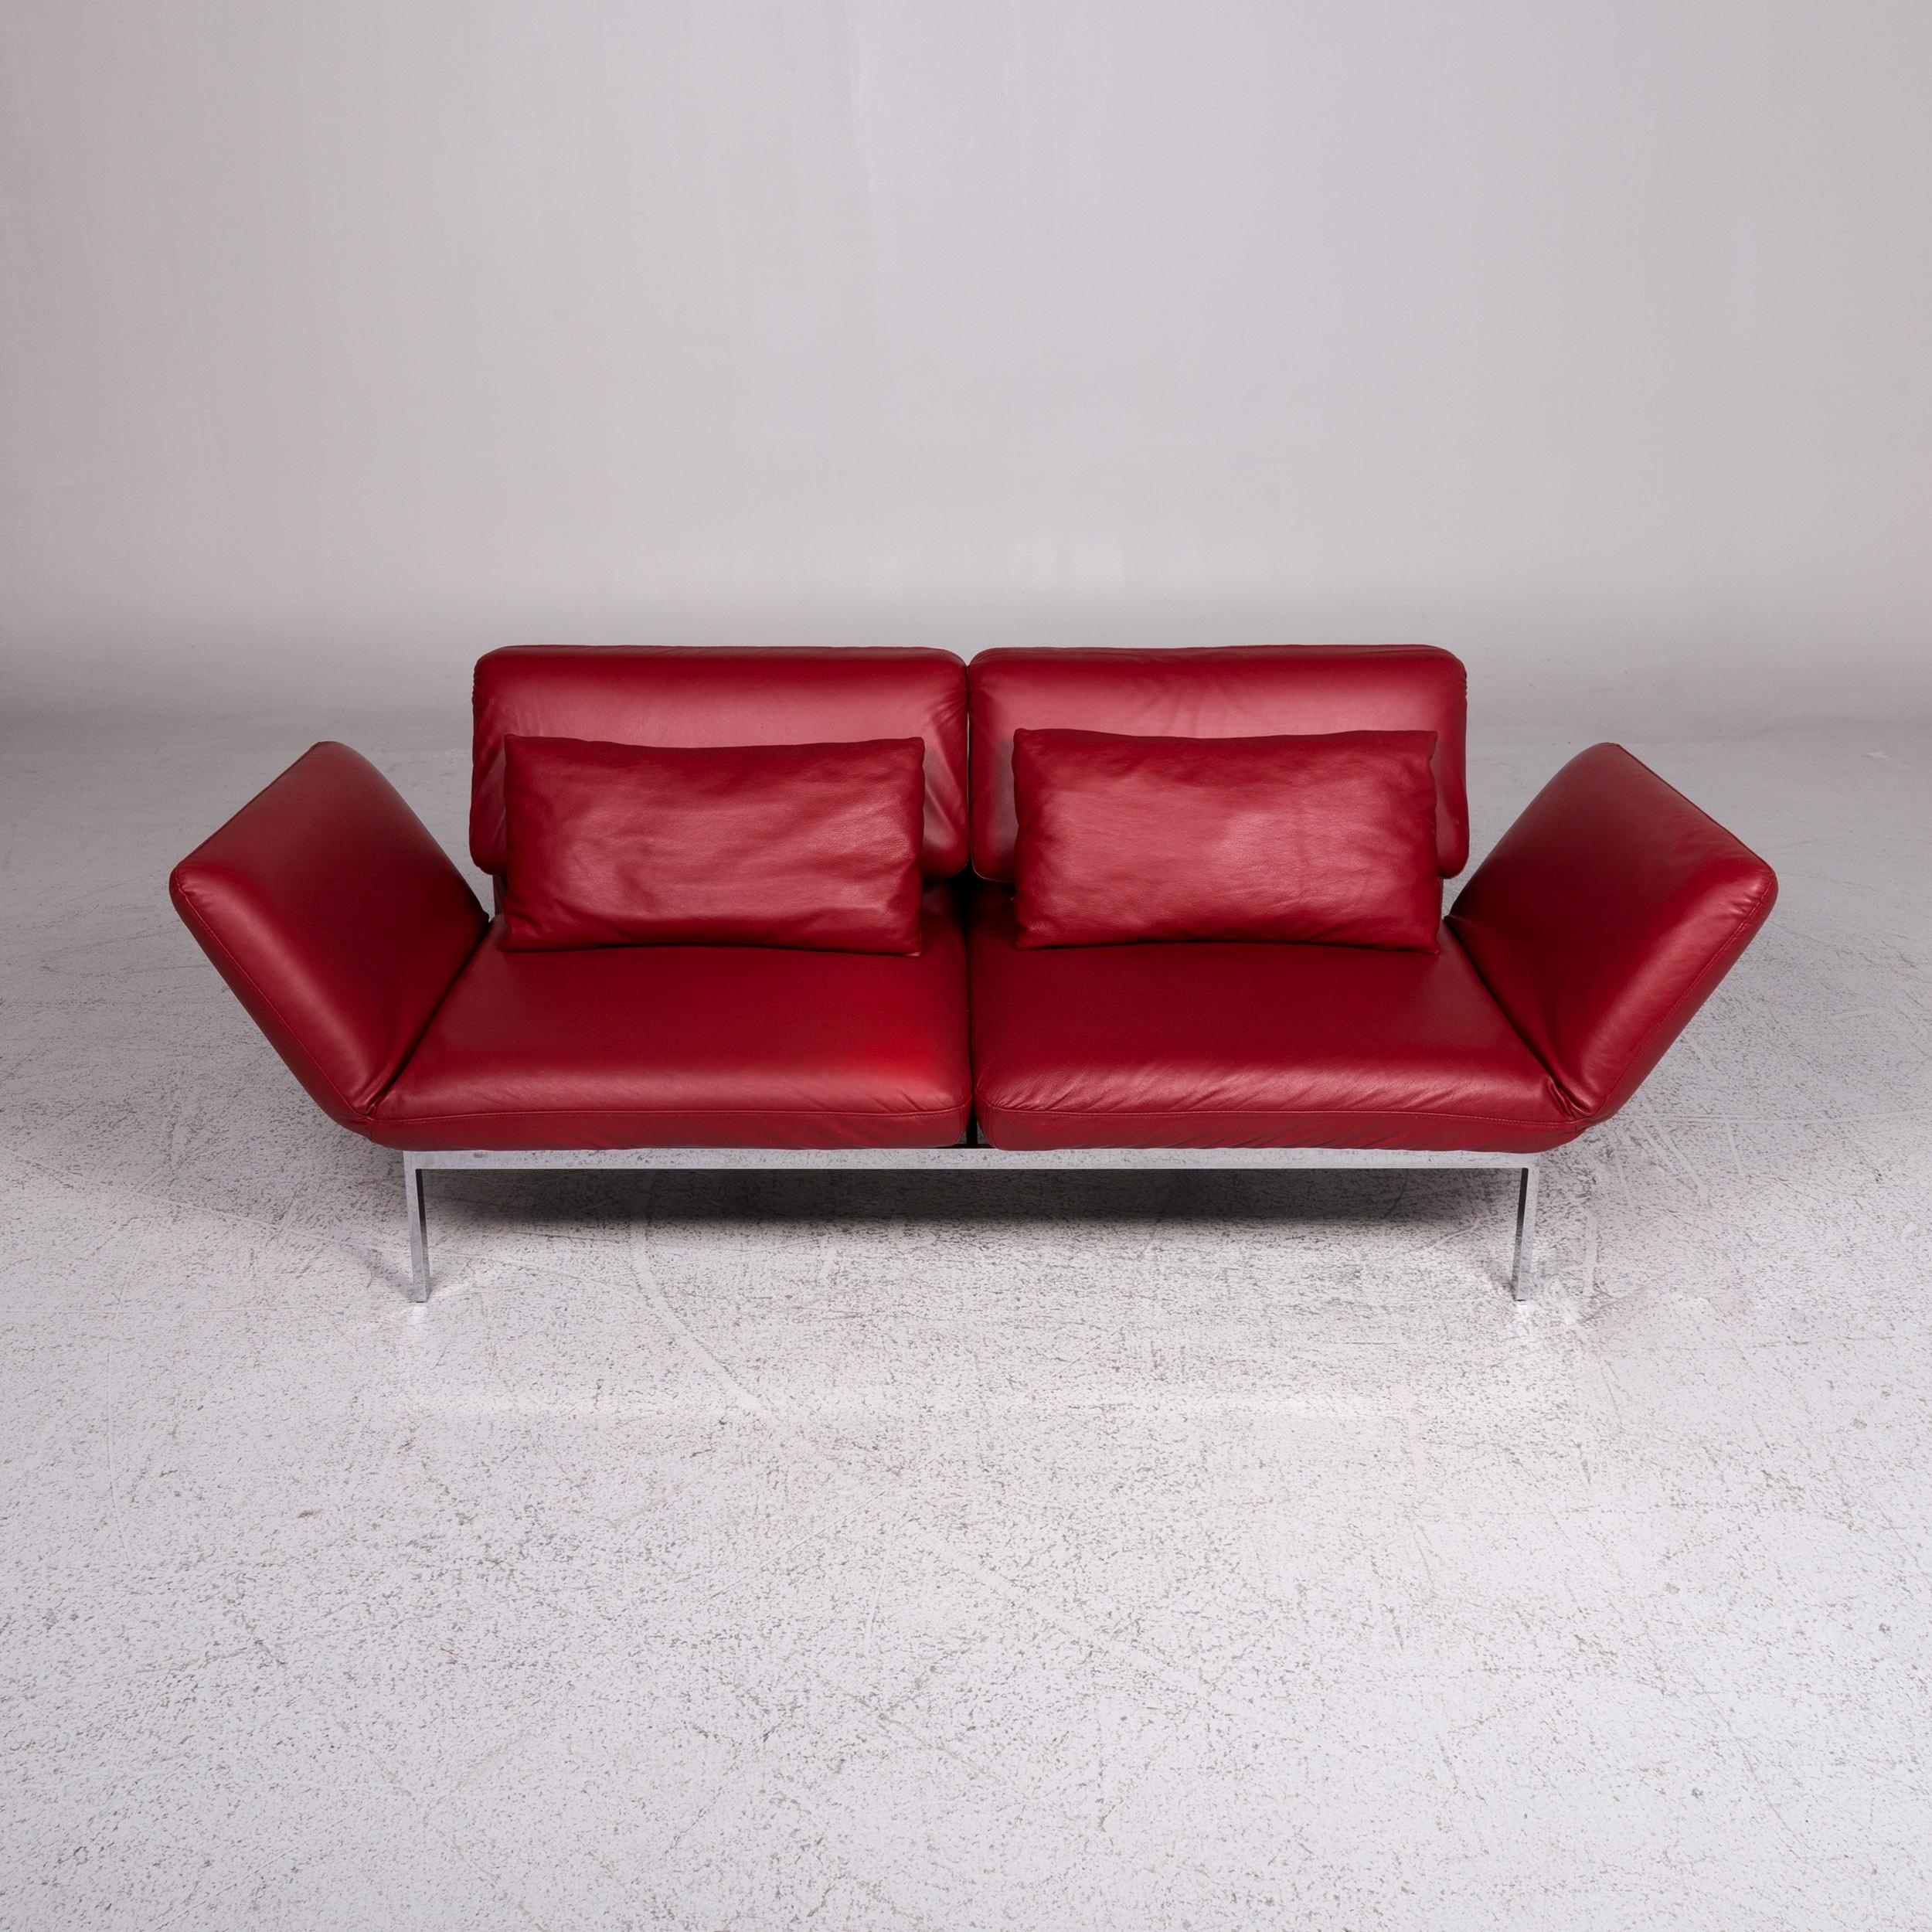 Brühl & Sippold Roro Designer Leather Sofa Red Two-Seat Relax Function Couch 5